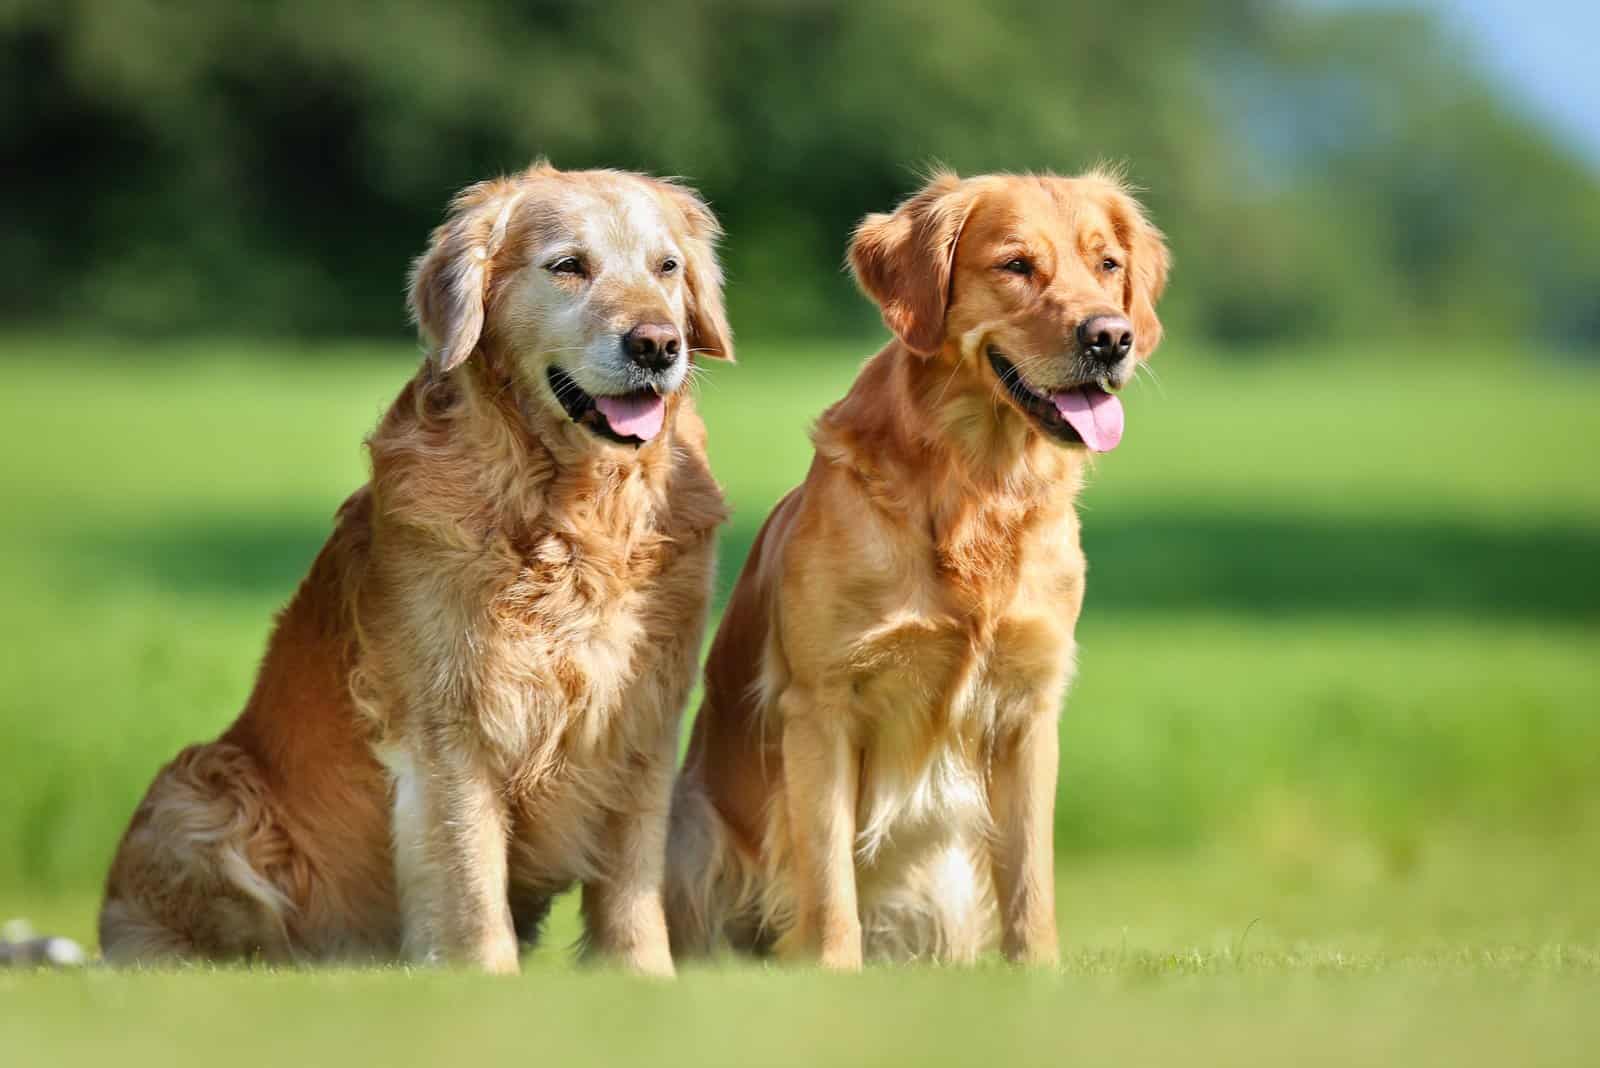 Male Vs Female Golden Retriever: What’s The Difference?